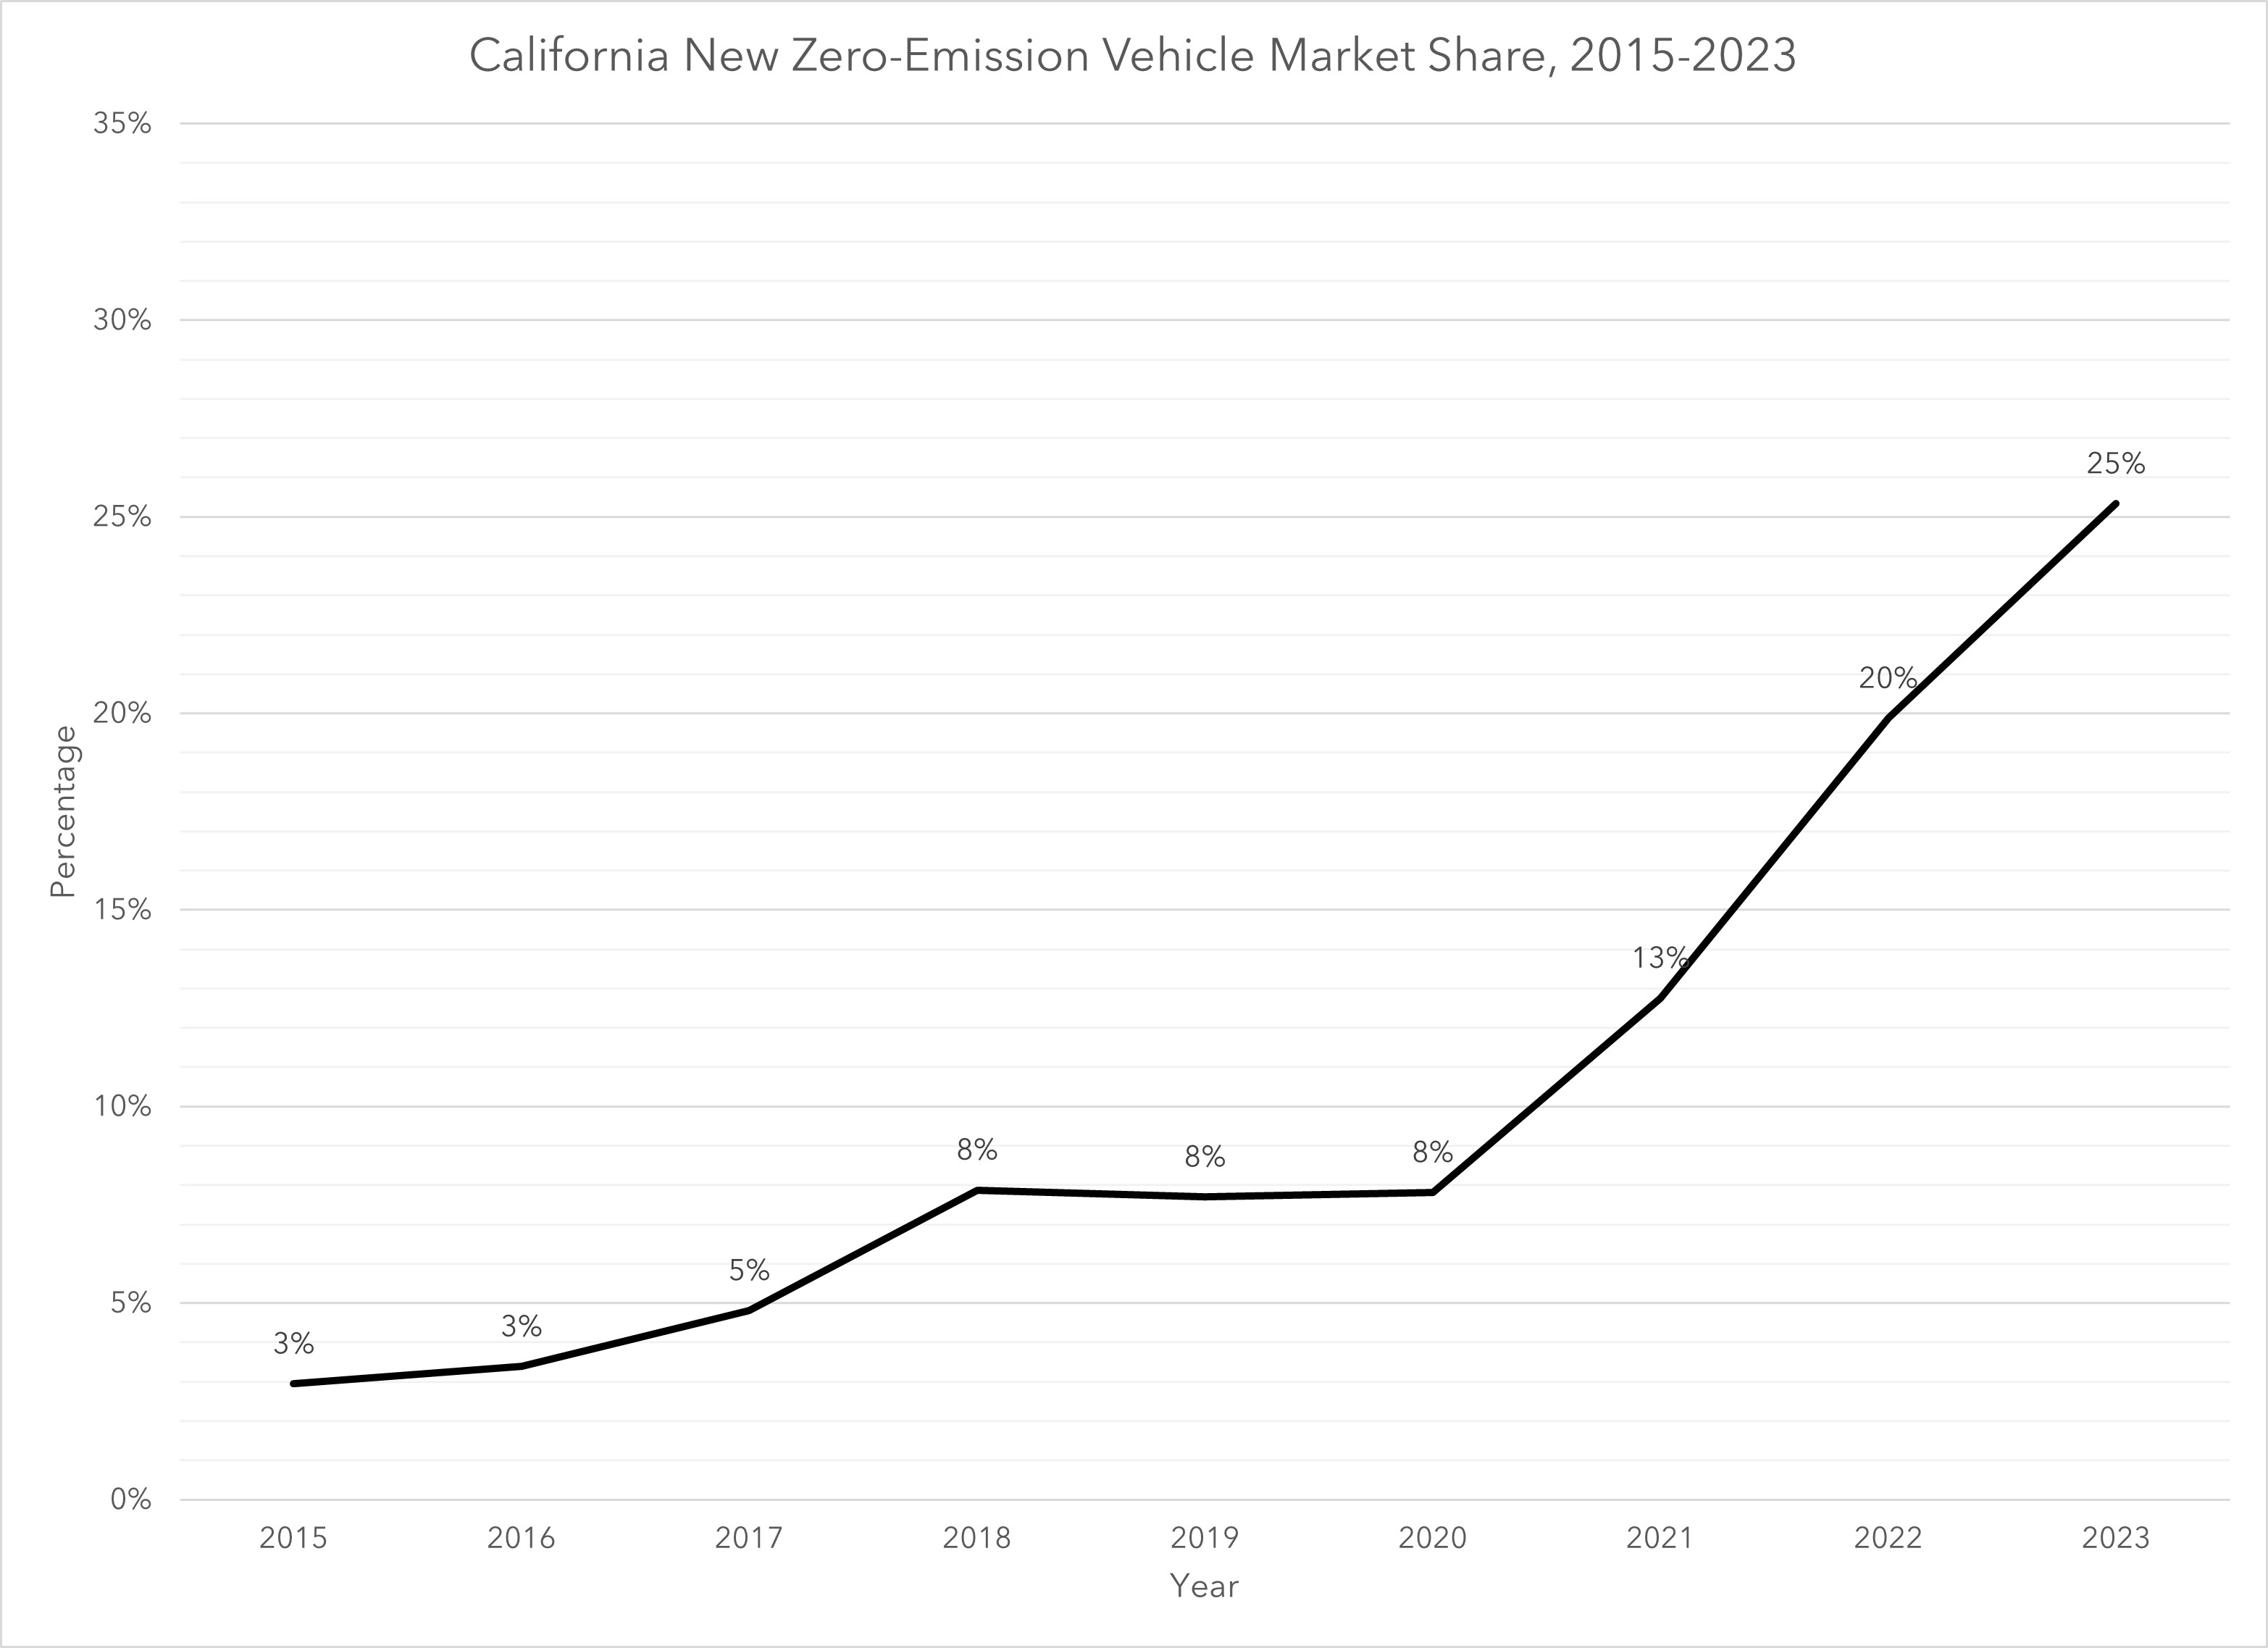 This visual displays California's annual zero-emission vehicle market share from 2015 to 2023. Market share steadily increases, starting at 3 percent in 2015 and increasing to 25 percent in 2023.